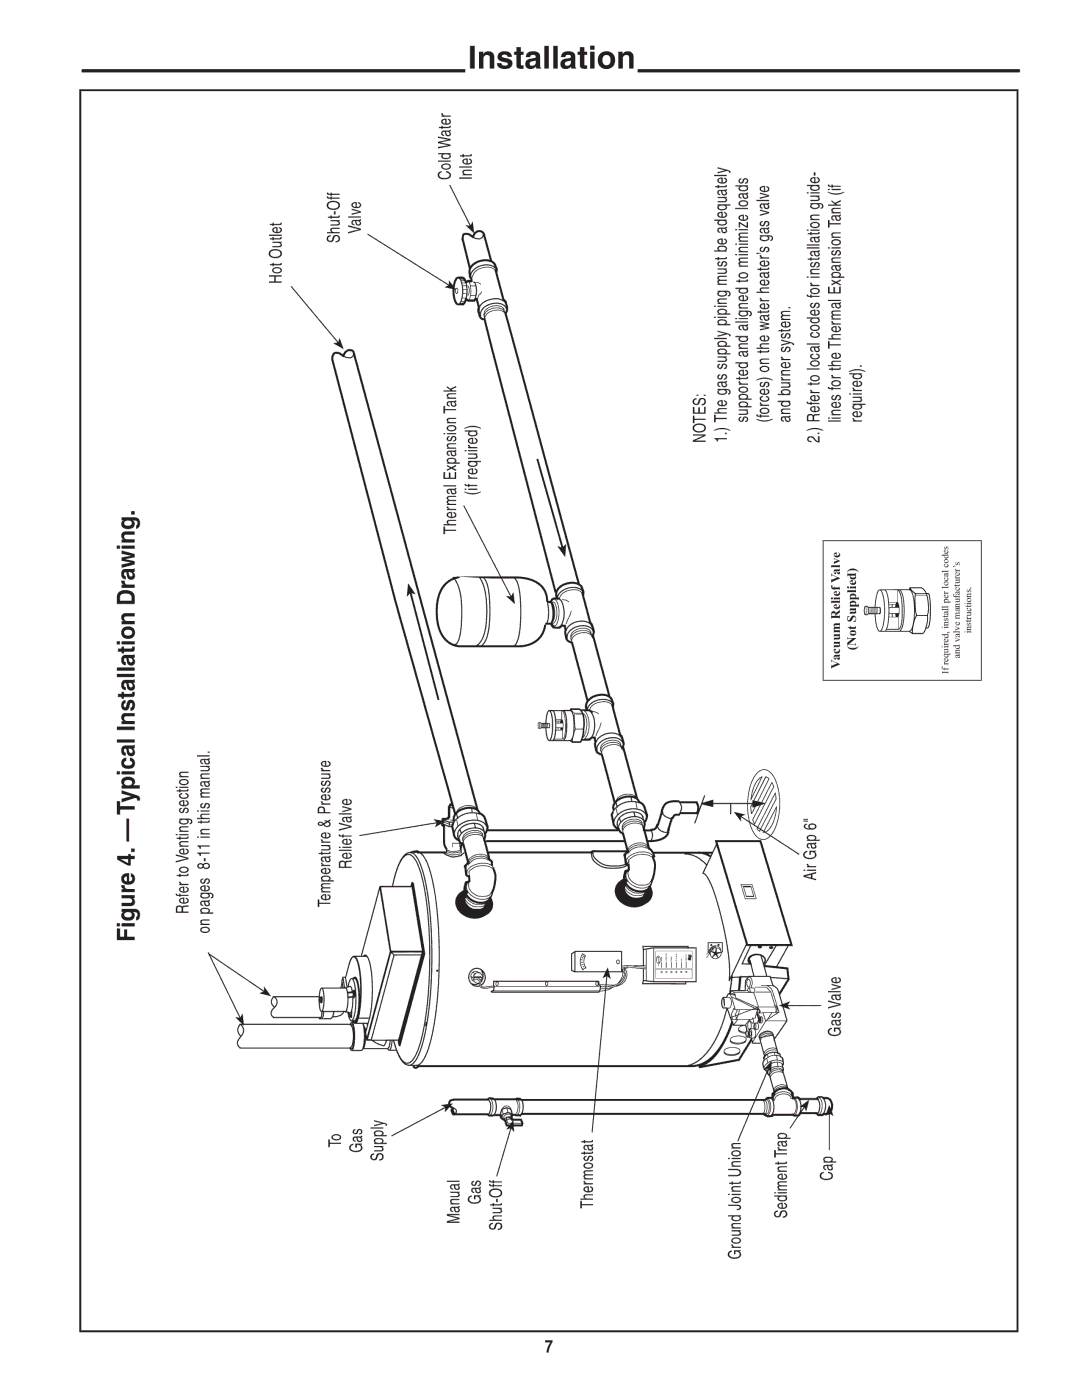 Rheem Commercial Power Direct Vent Water heater installation instructions Typical Installation Drawing 